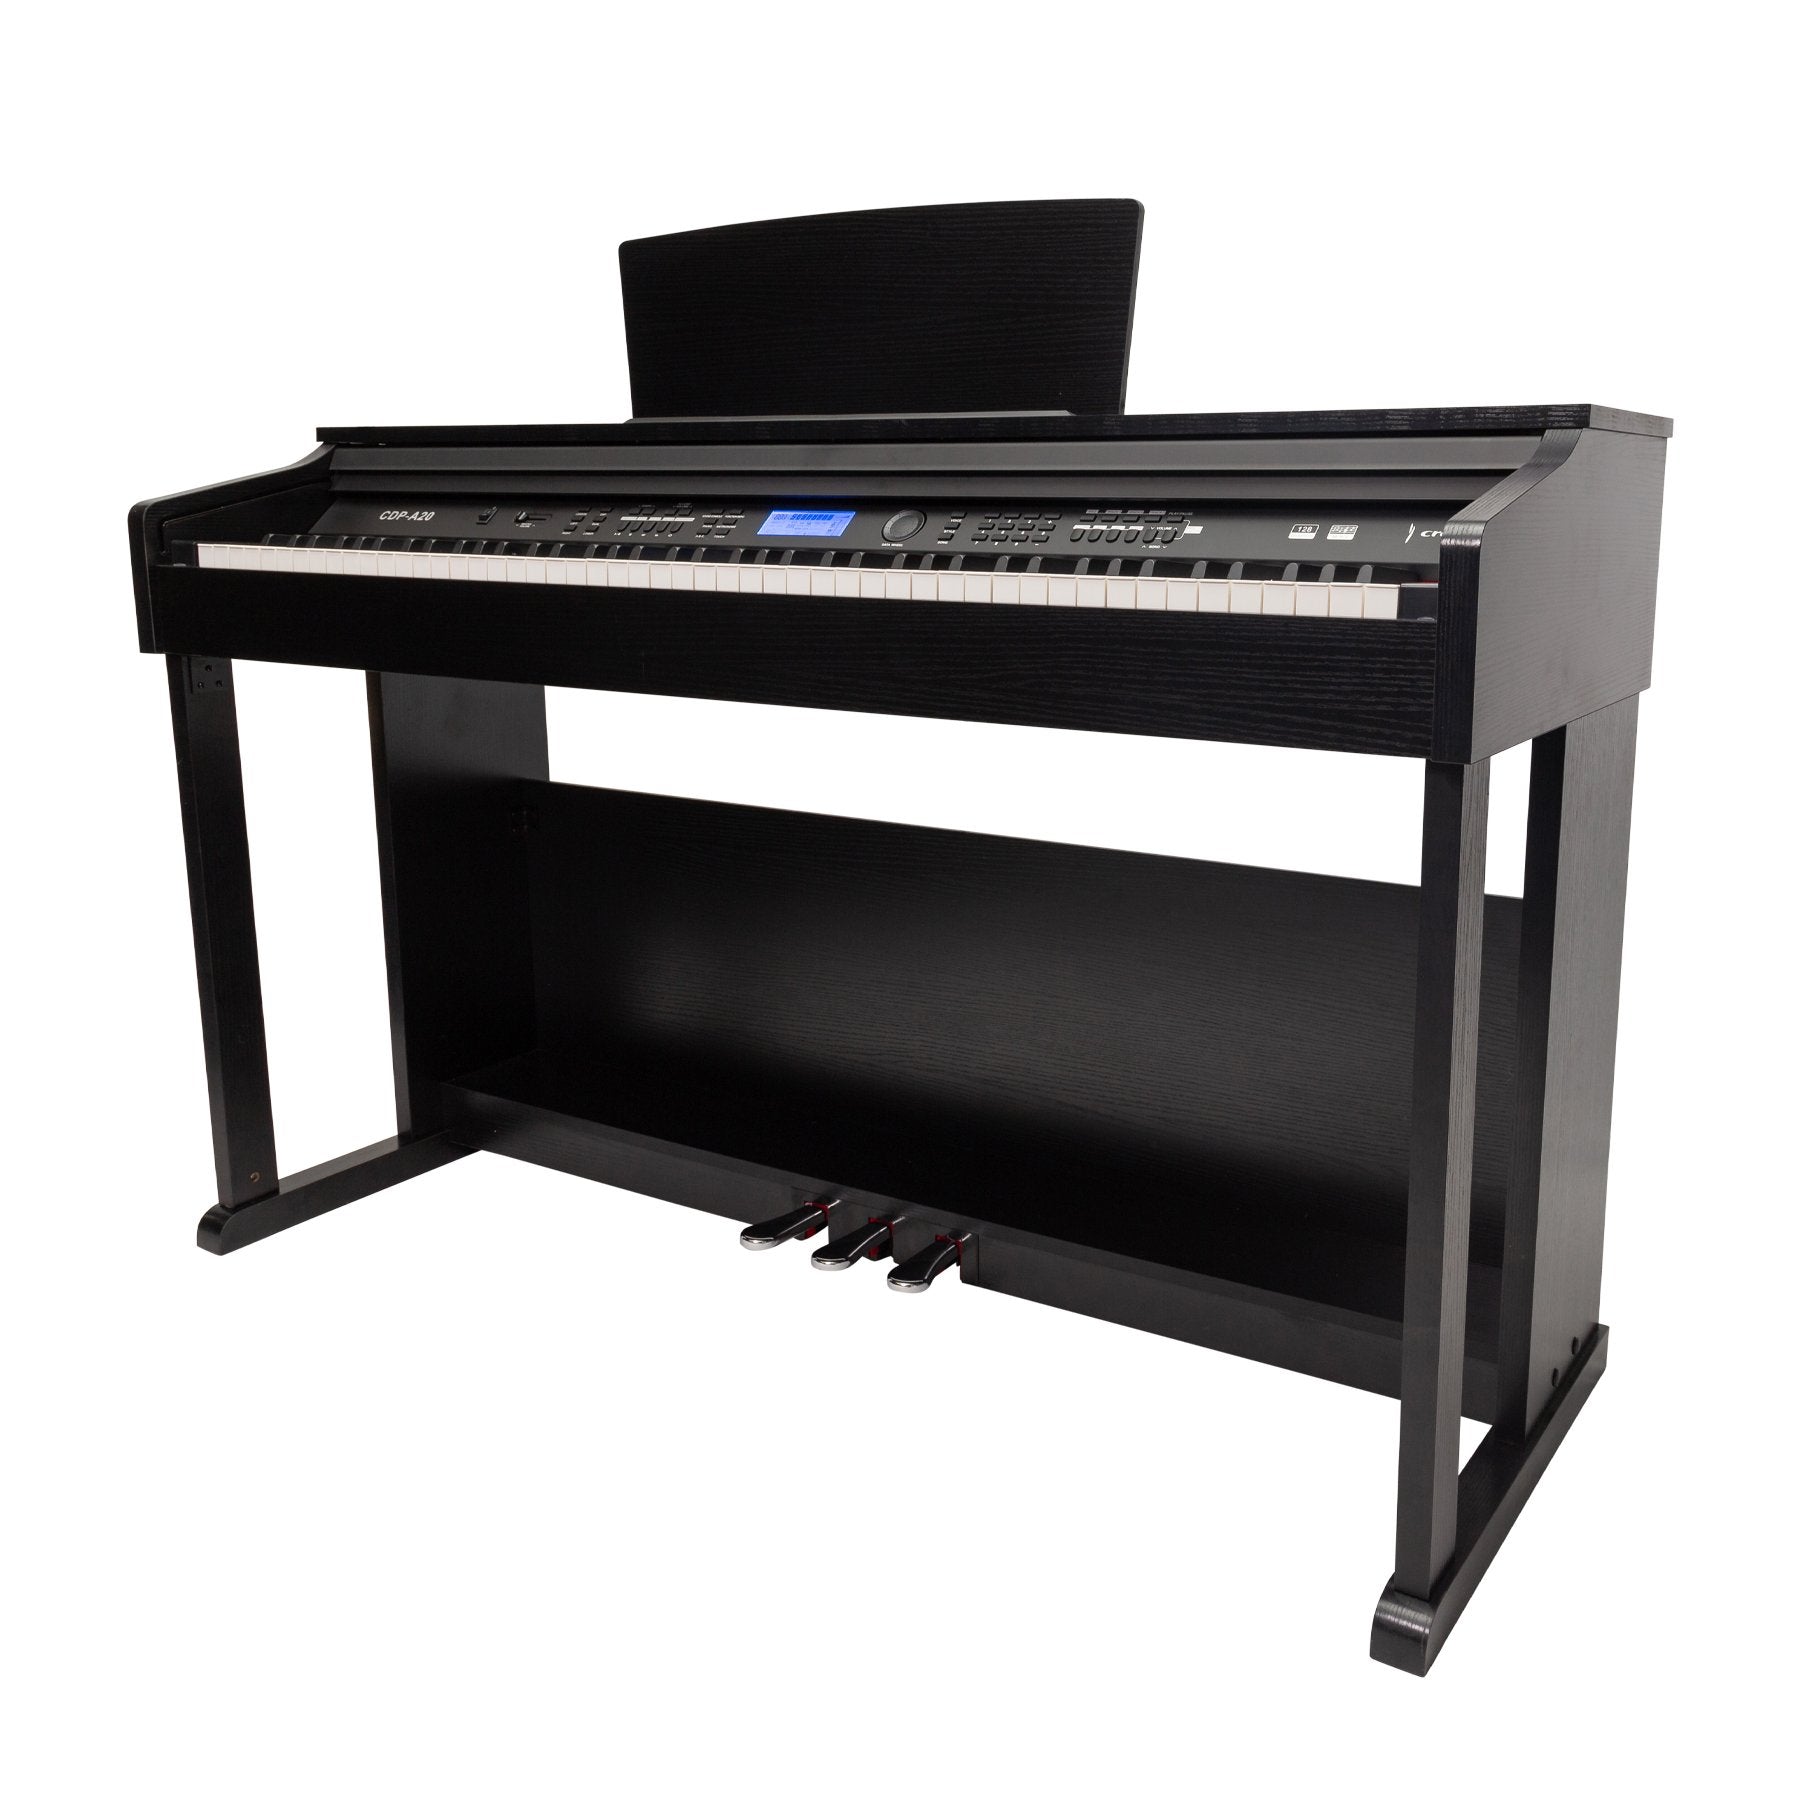 Crown A20 88-Key Touch Responsive Digital Piano (Black)-CDP-A20-BLK